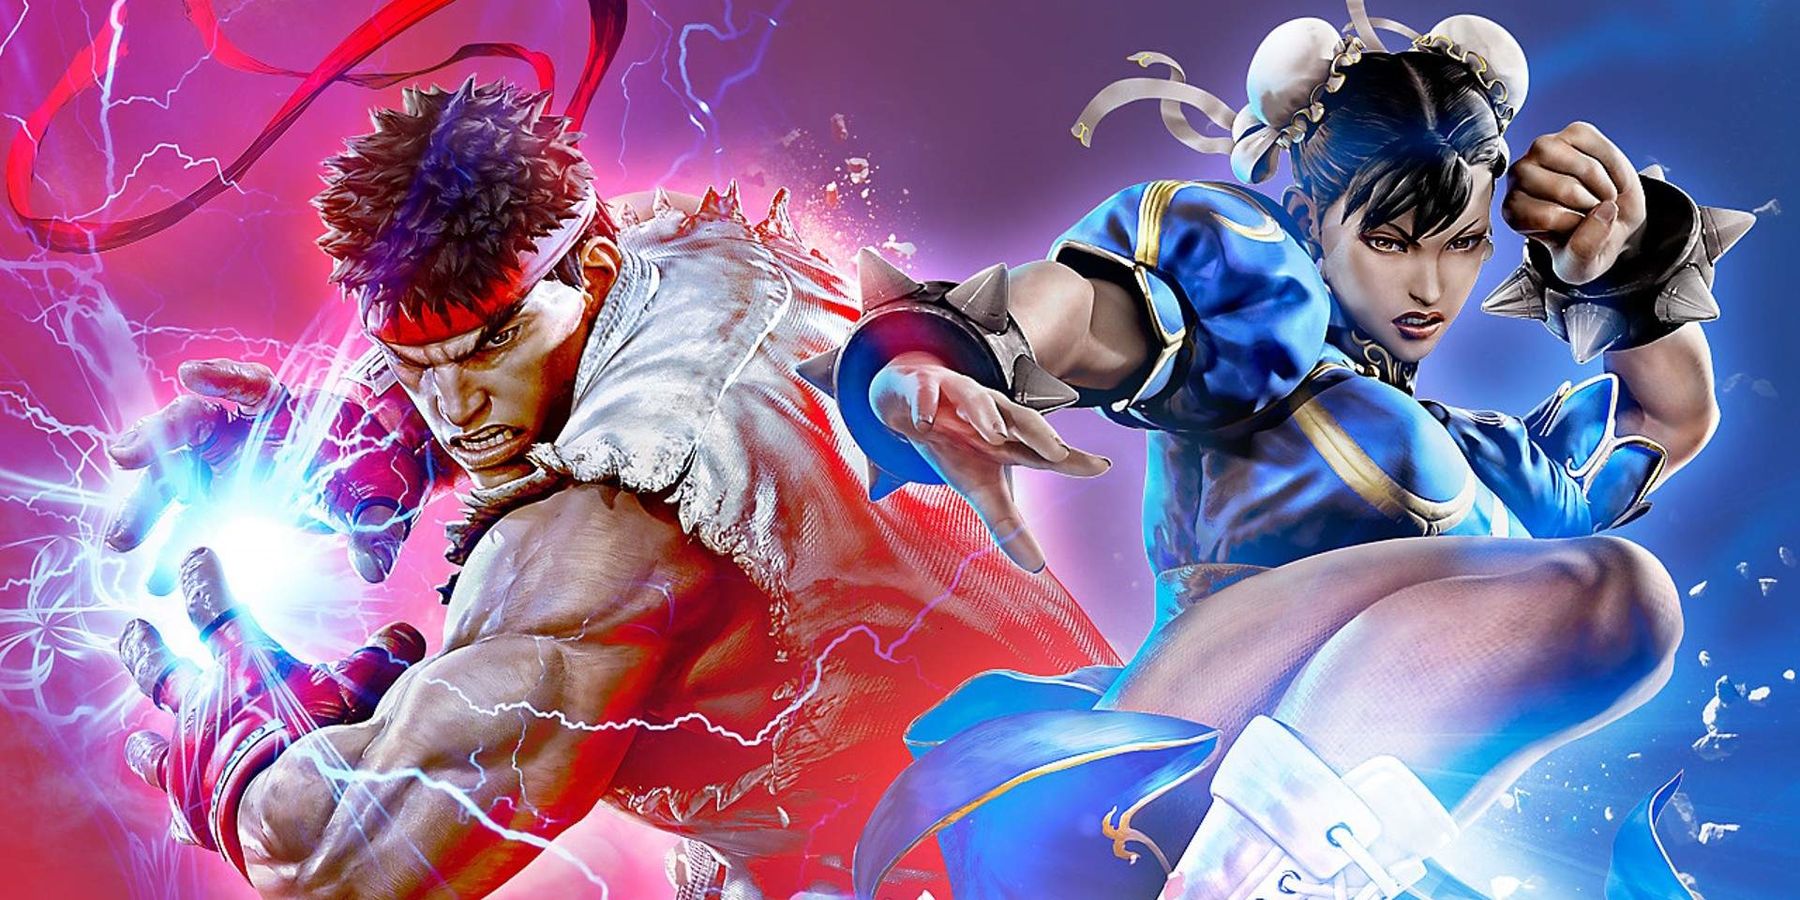 Street Fighter 6: Which Version is Best? (Standard, Deluxe, or Ultimate)